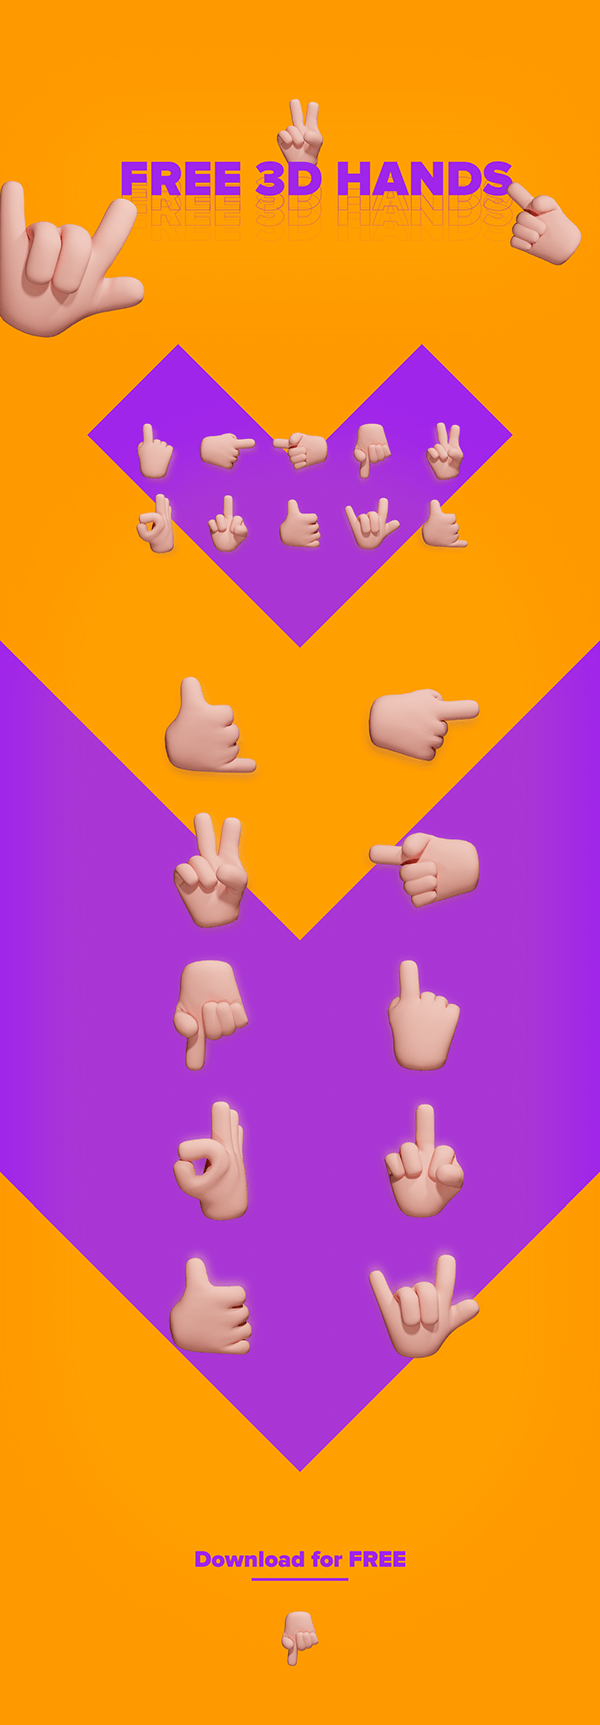 Free 3D HANDS ICONS